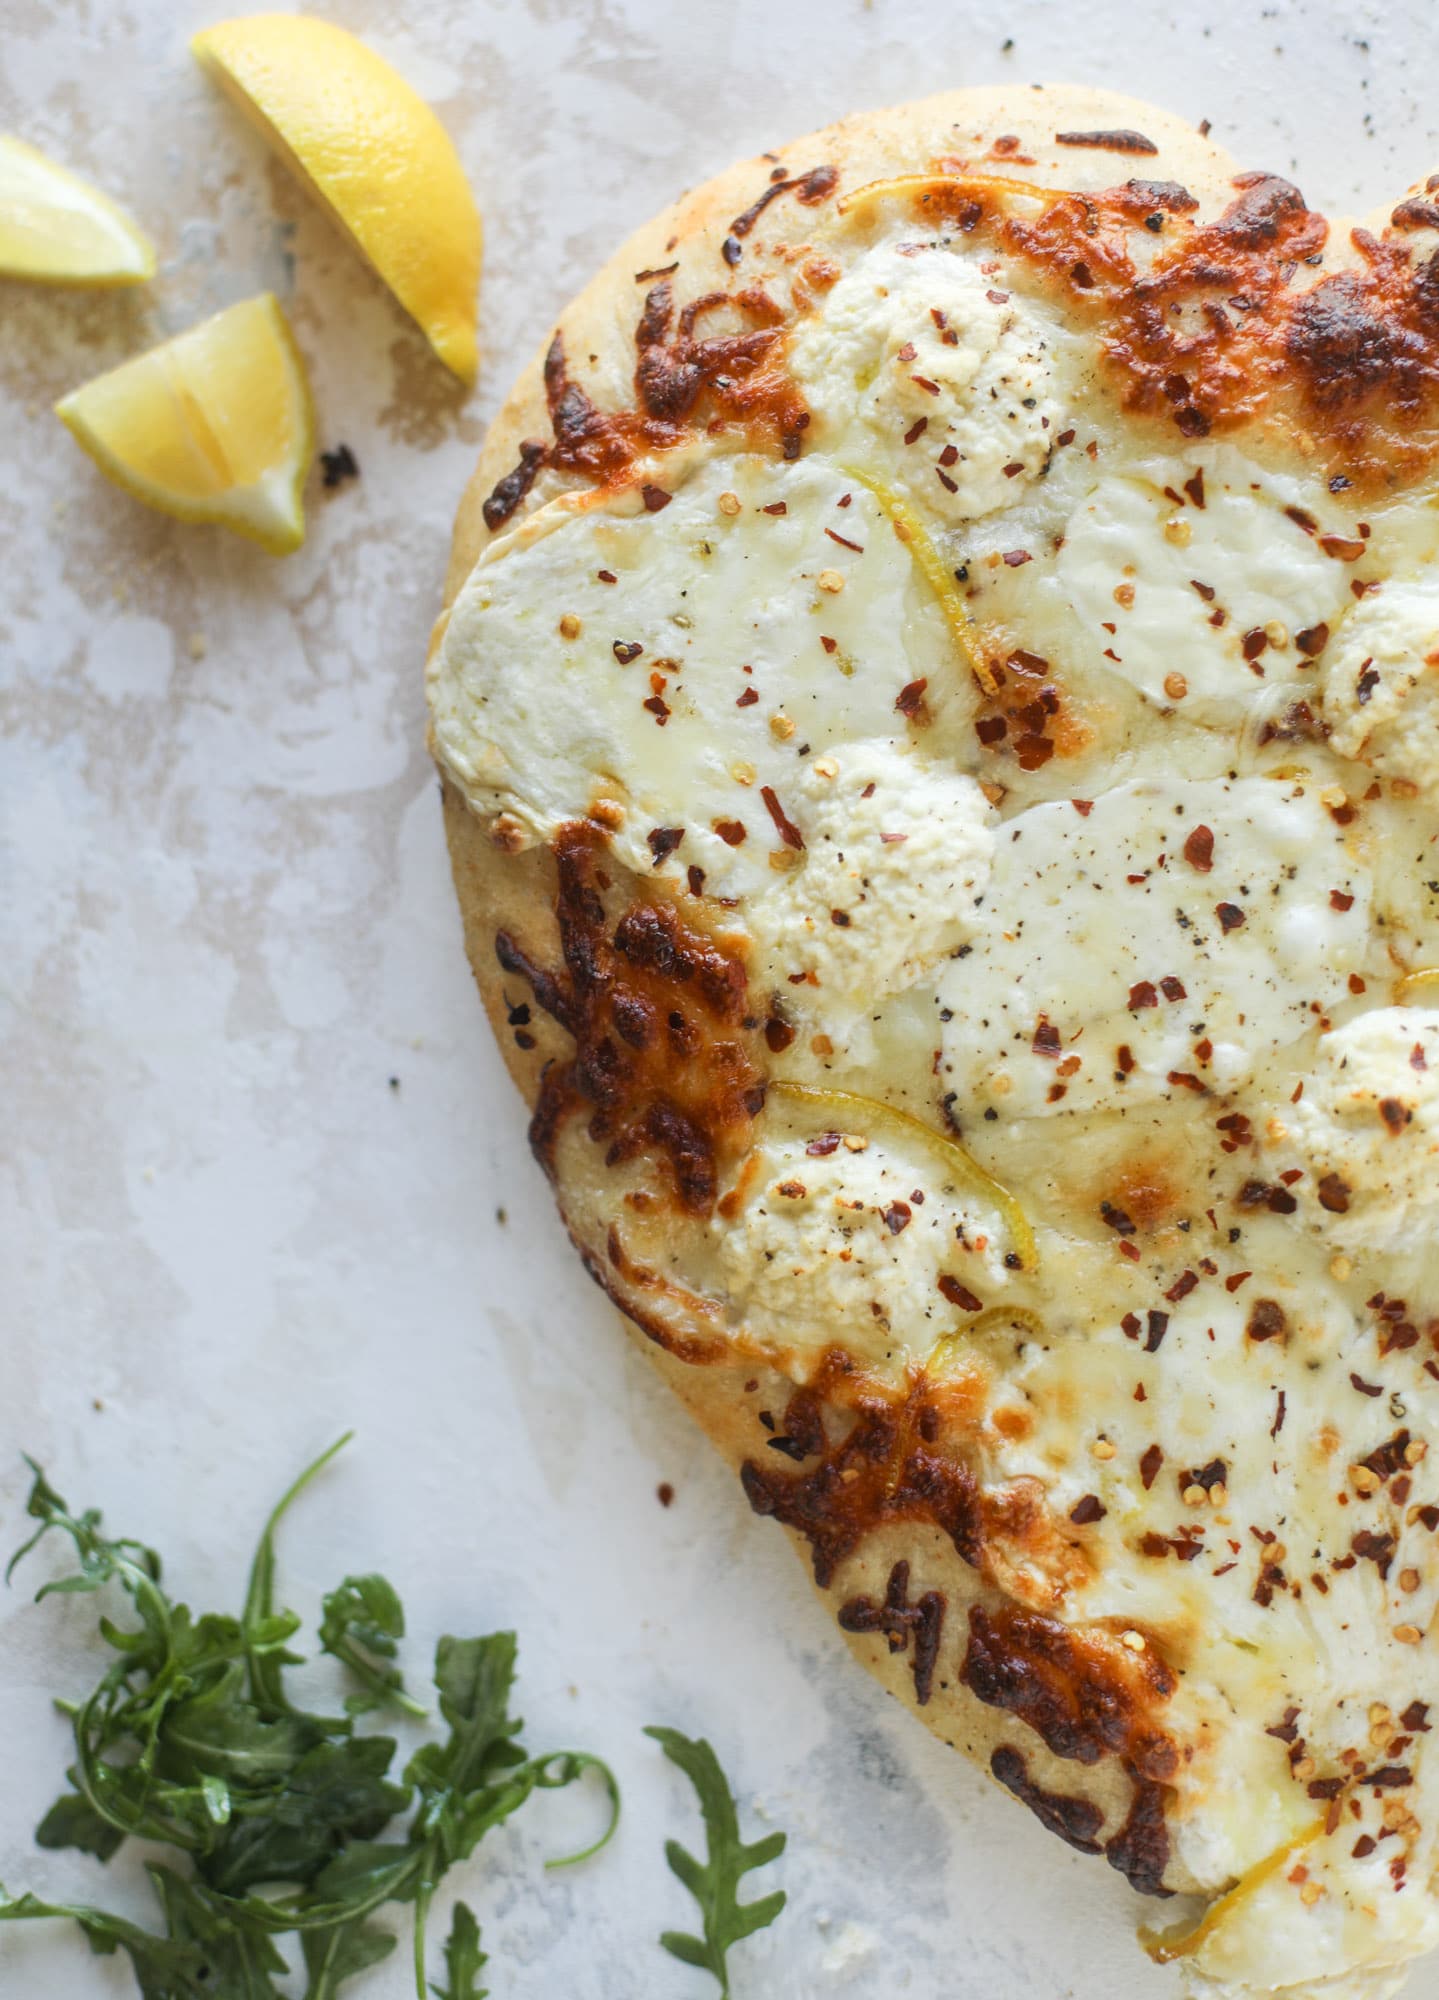 Our favorite white pizza recipe has four different kinds of cheese and comes on a garlic bread crust! Topped with crushed pepper and lemon - tons of flavor! I howsweeteats.com #white #pizza